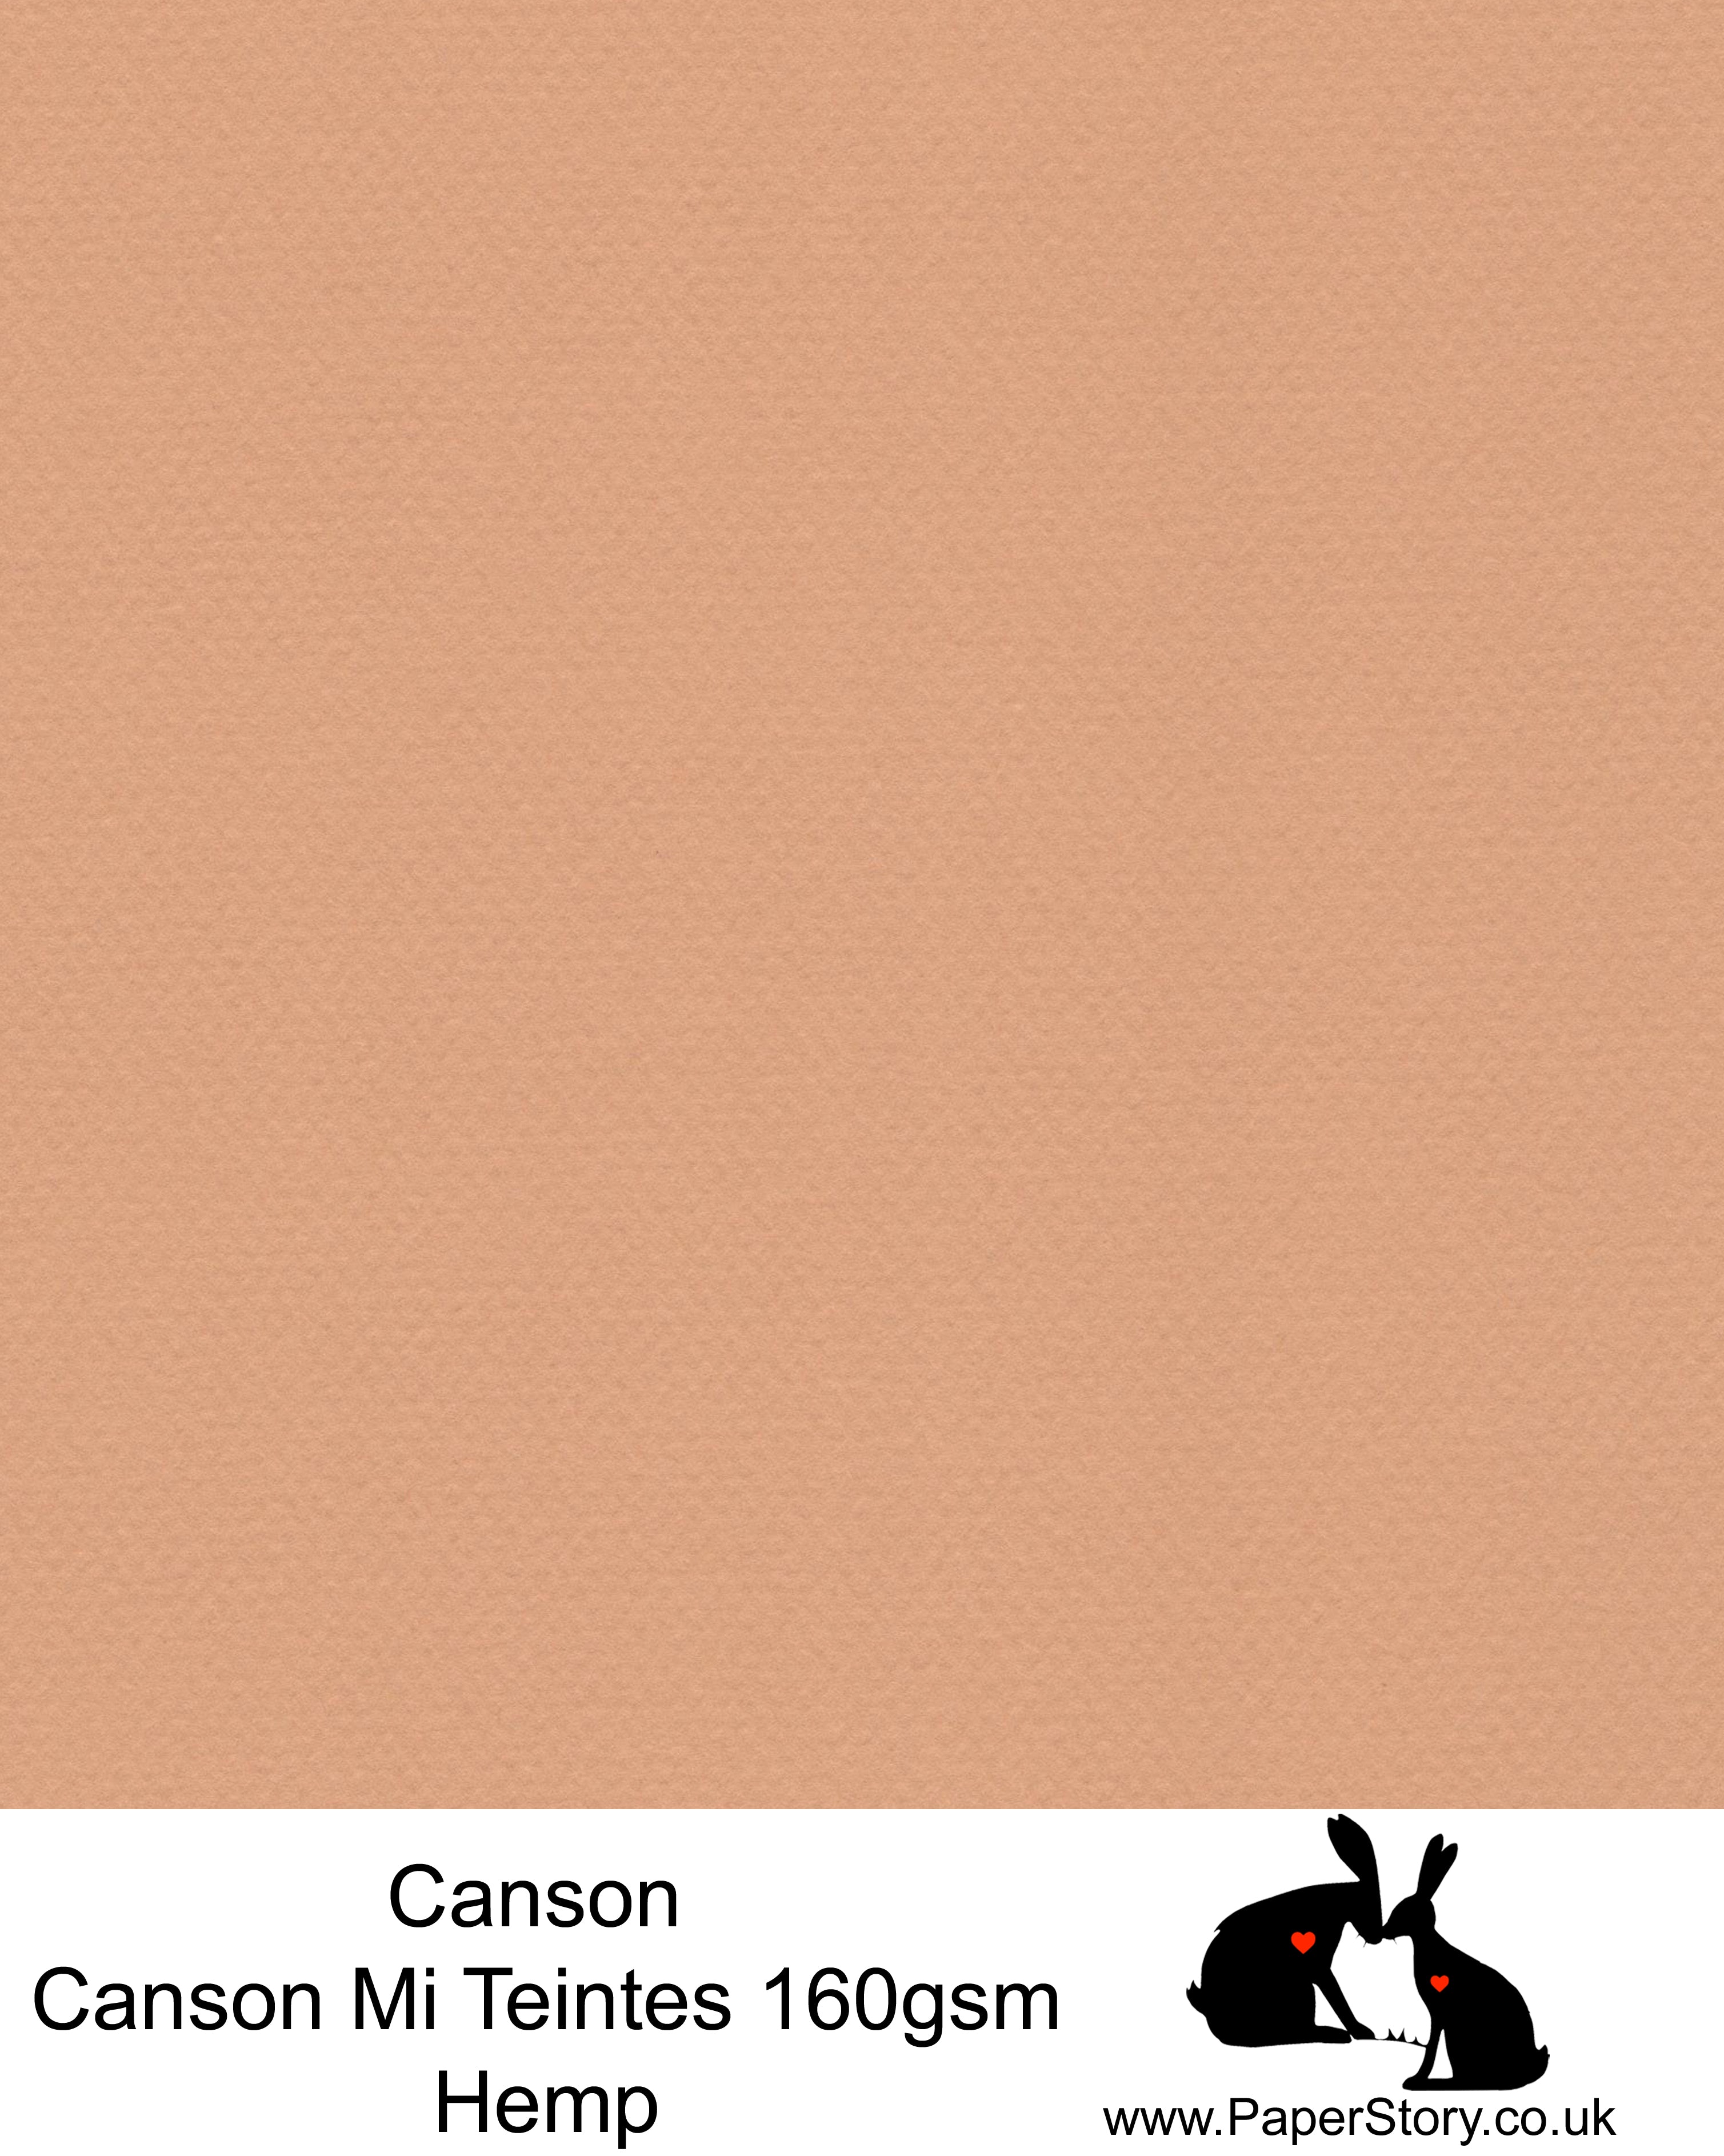 Canson Mi Teintes acid free, Hemp warm brown, hammered texture honeycomb surface paper 160 gsm. This is a popular and classic paper for all artists especially well respected for Pastel  and Papercutting made famous by Paper Panda. This paper has a honeycombed finish one side and fine grain the other. An authentic art paper, acid free with a  very high 50% cotton content. Canson Mi-Teintes complies with the ISO 9706 standard on permanence, a guarantee of excellent conservation  